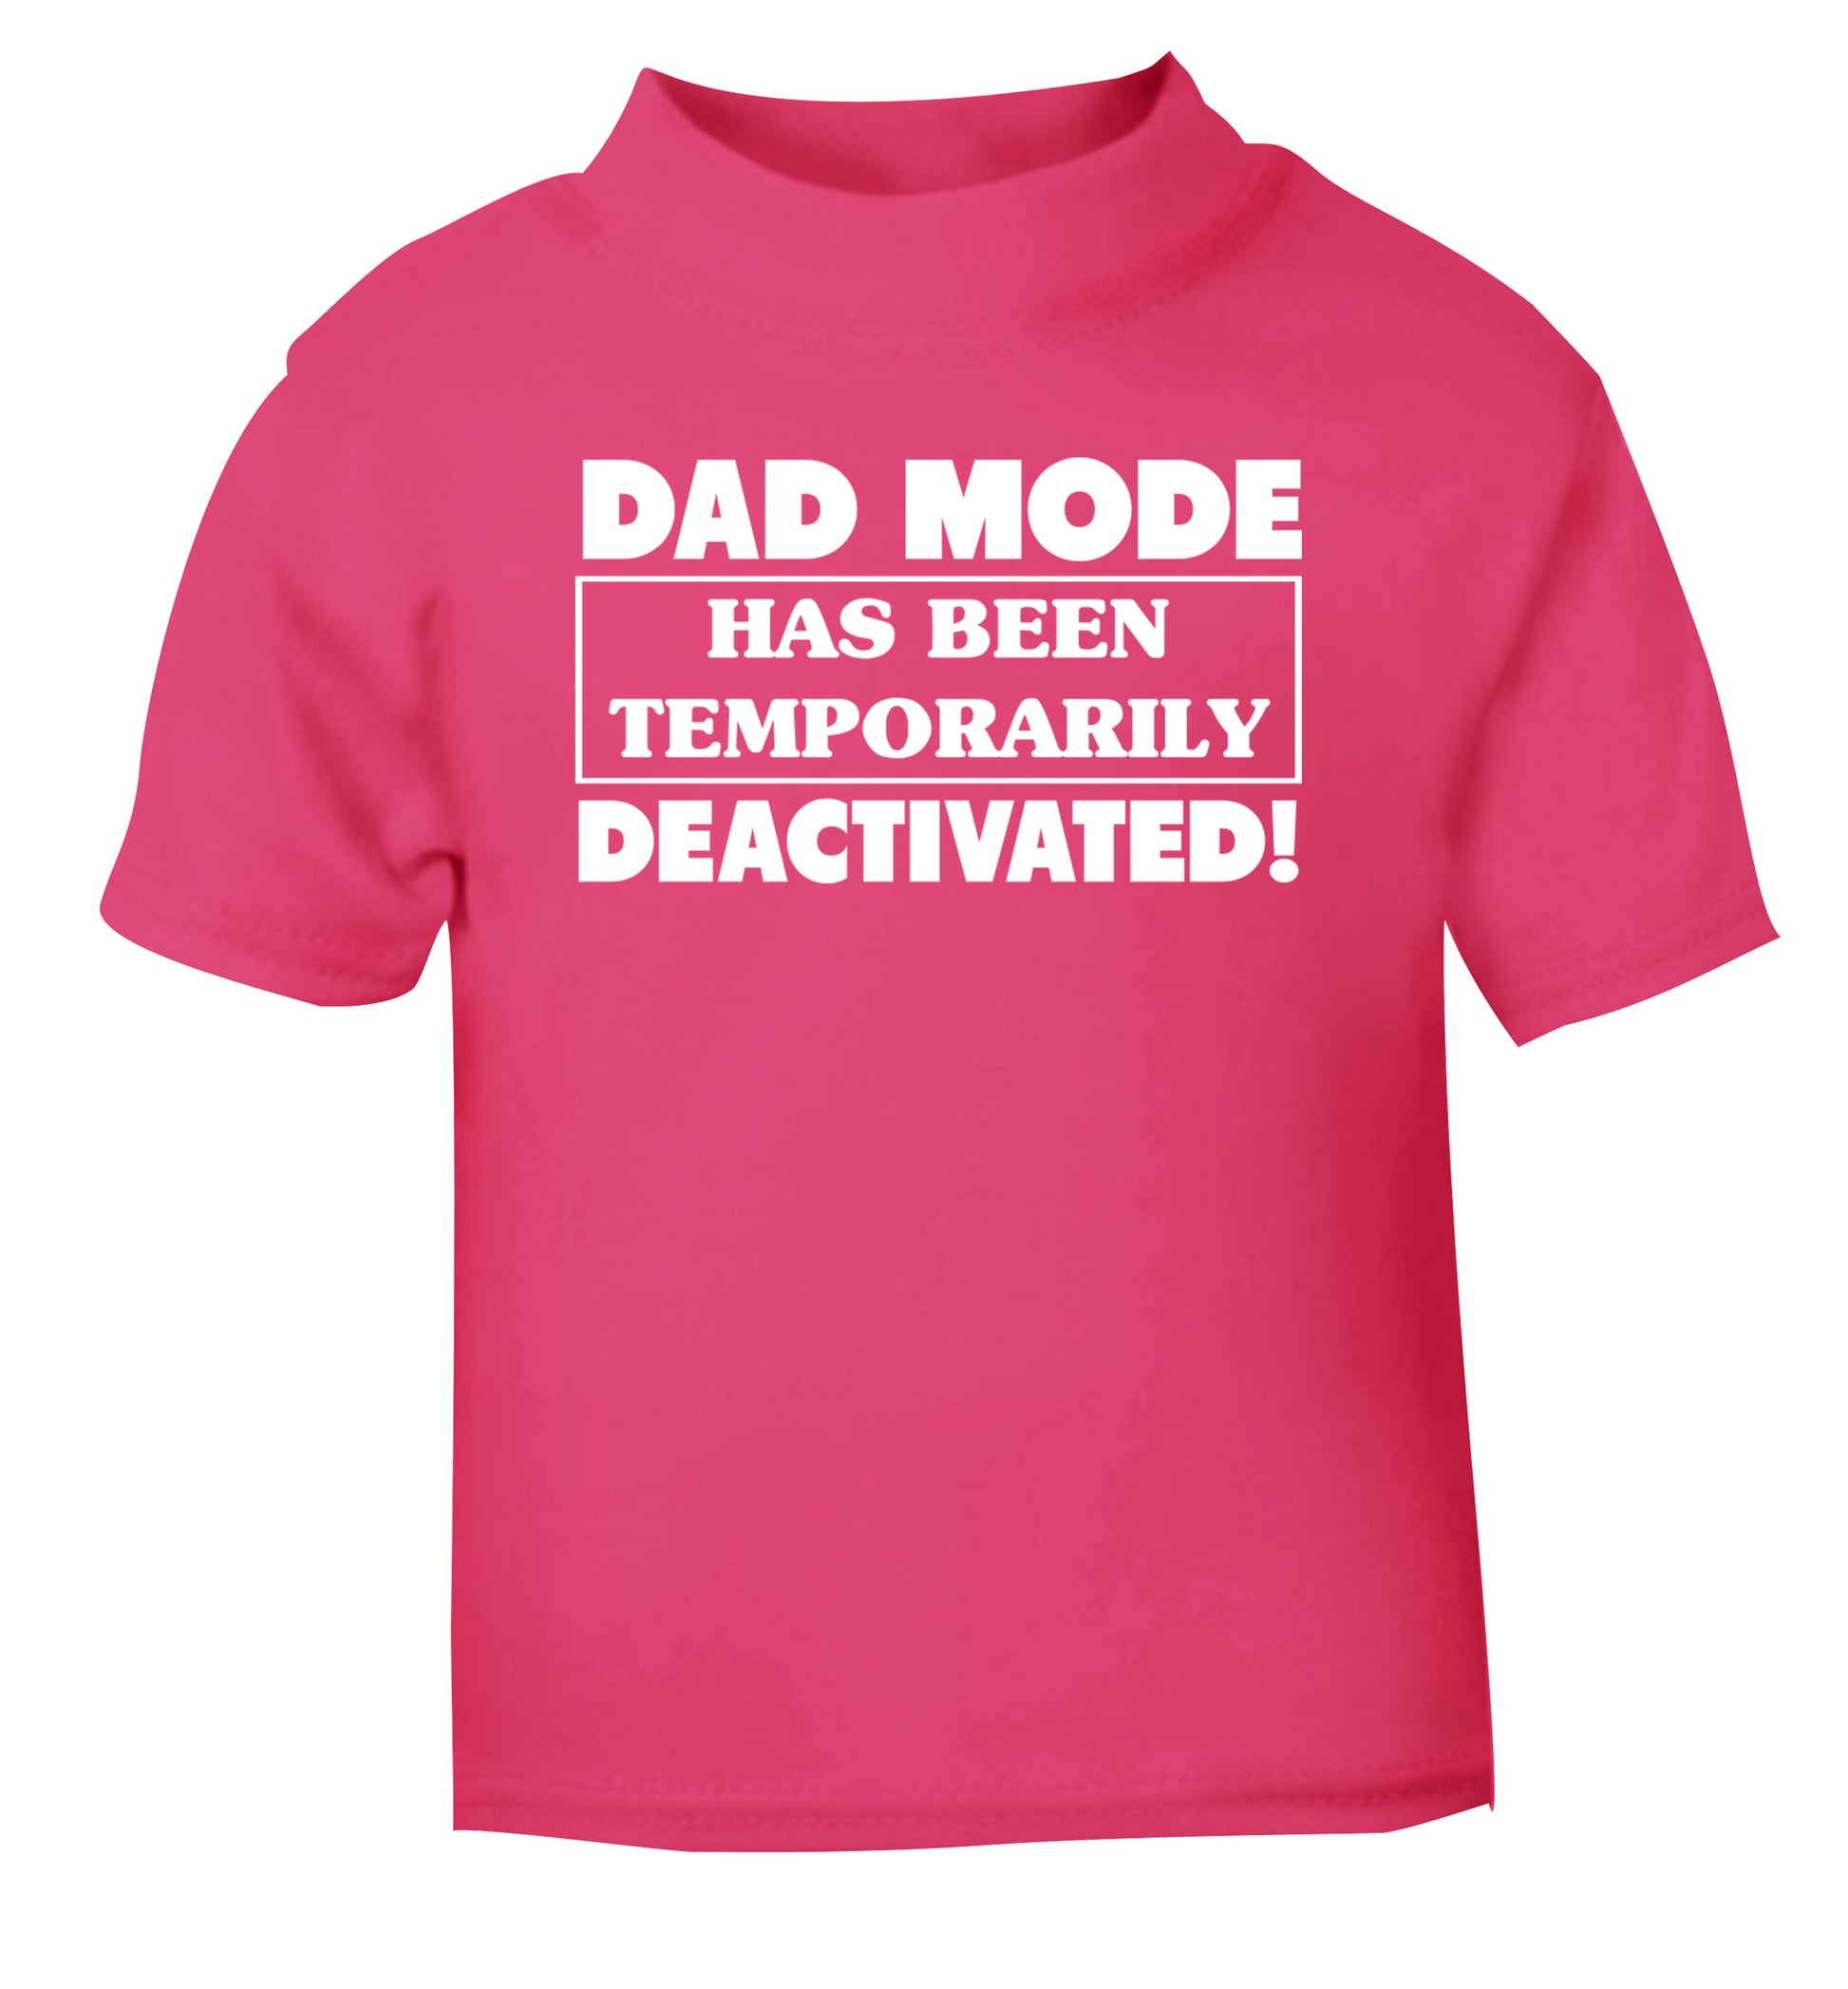 Dad mode has been temporarily deactivated! pink Baby Toddler Tshirt 2 Years